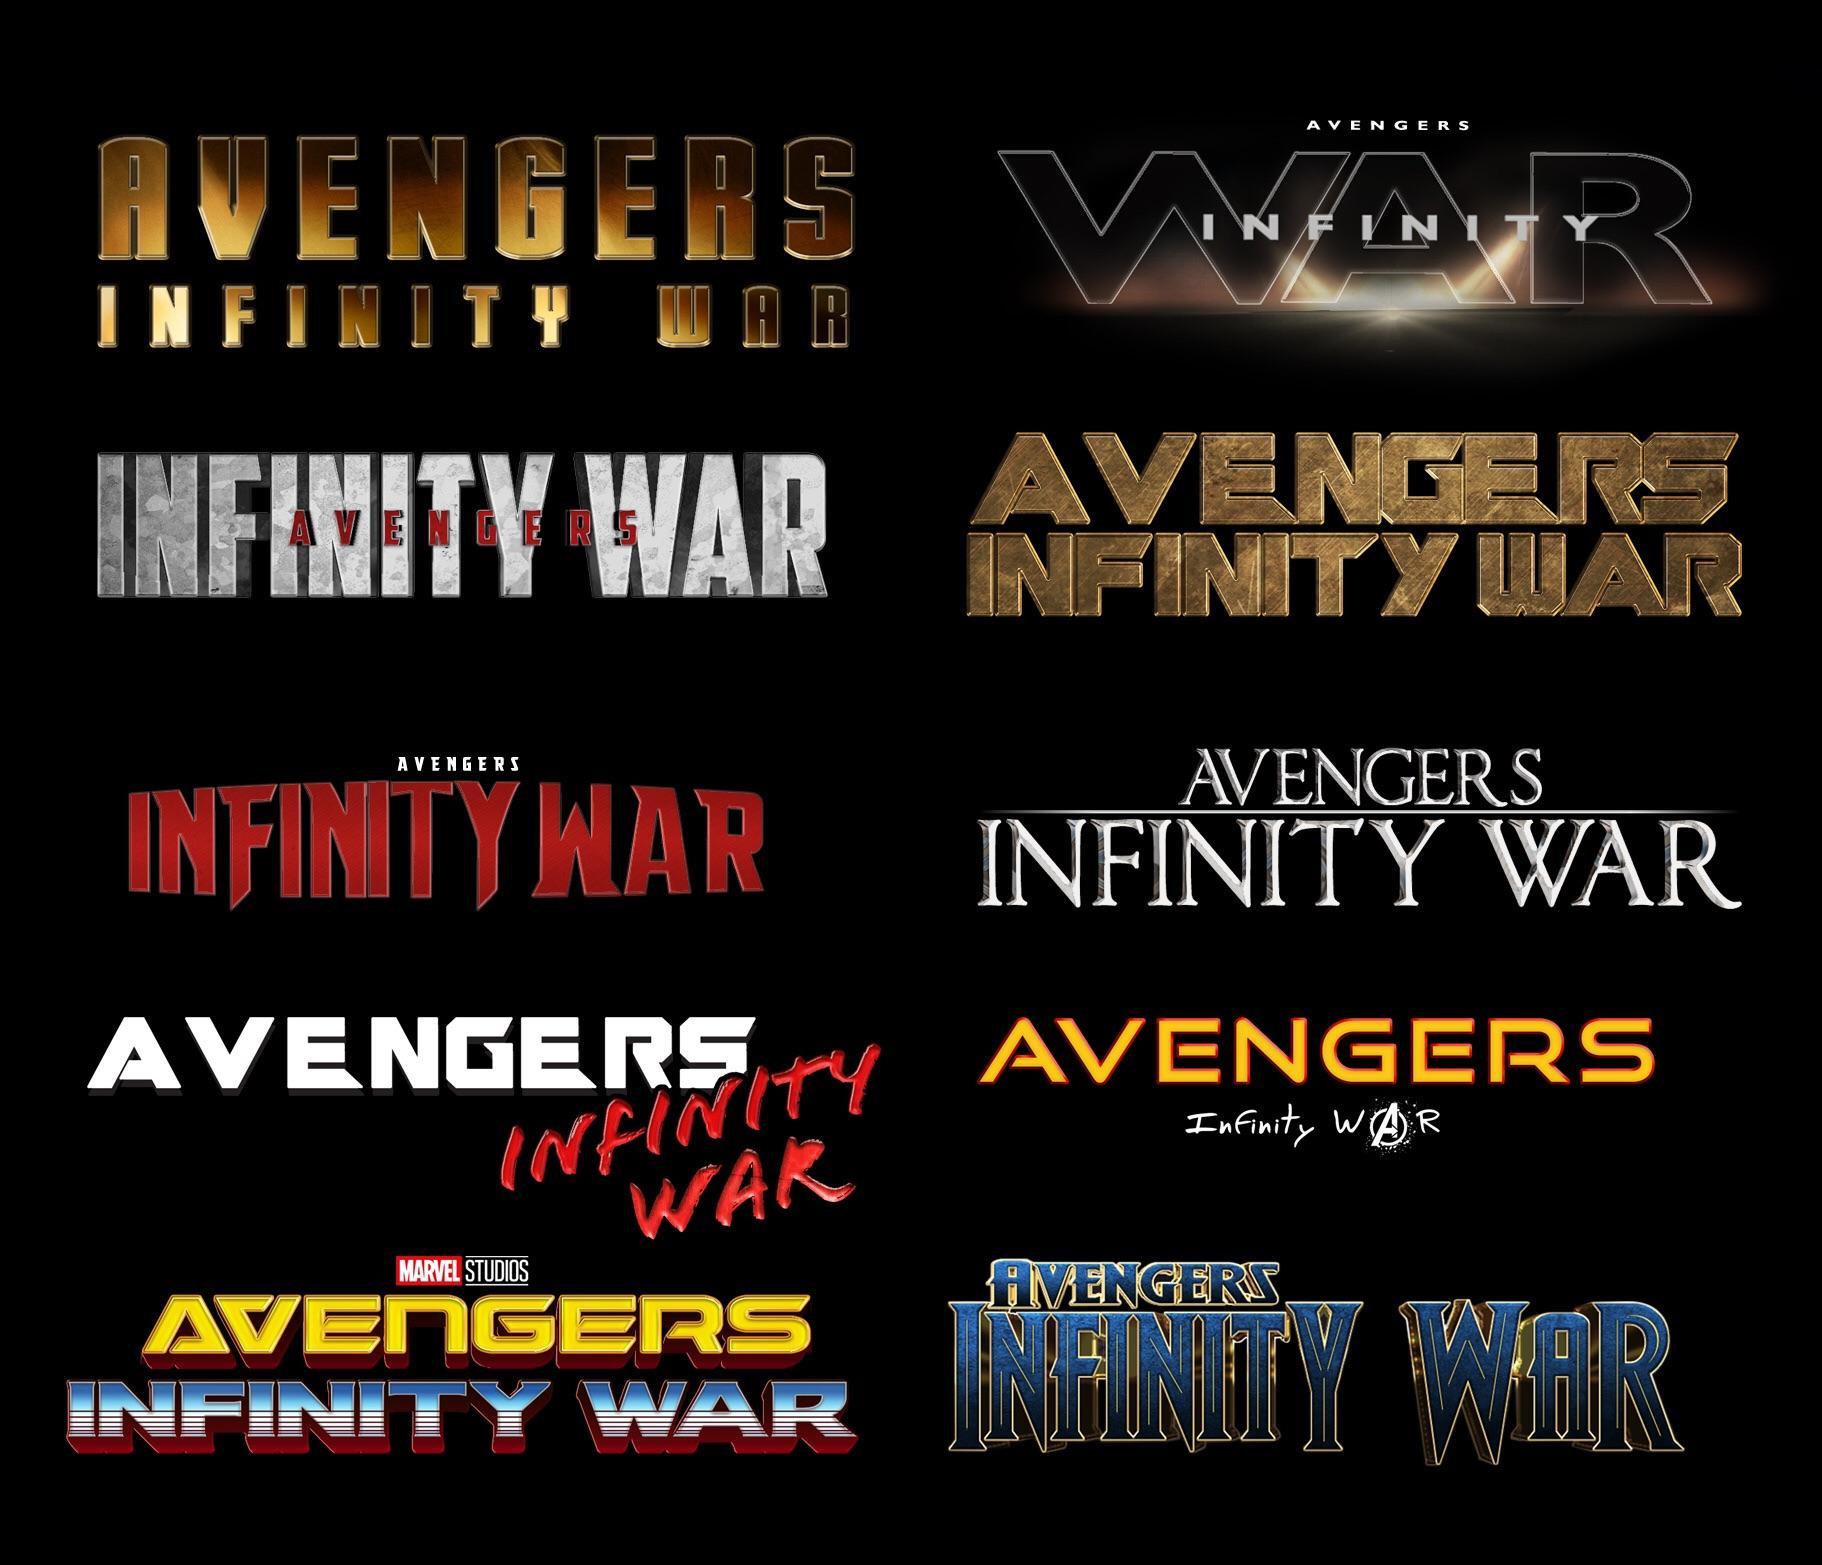 Avengers Infinity War Logo - Avengers Infinity War, but in the style of past MCU Movie Logos